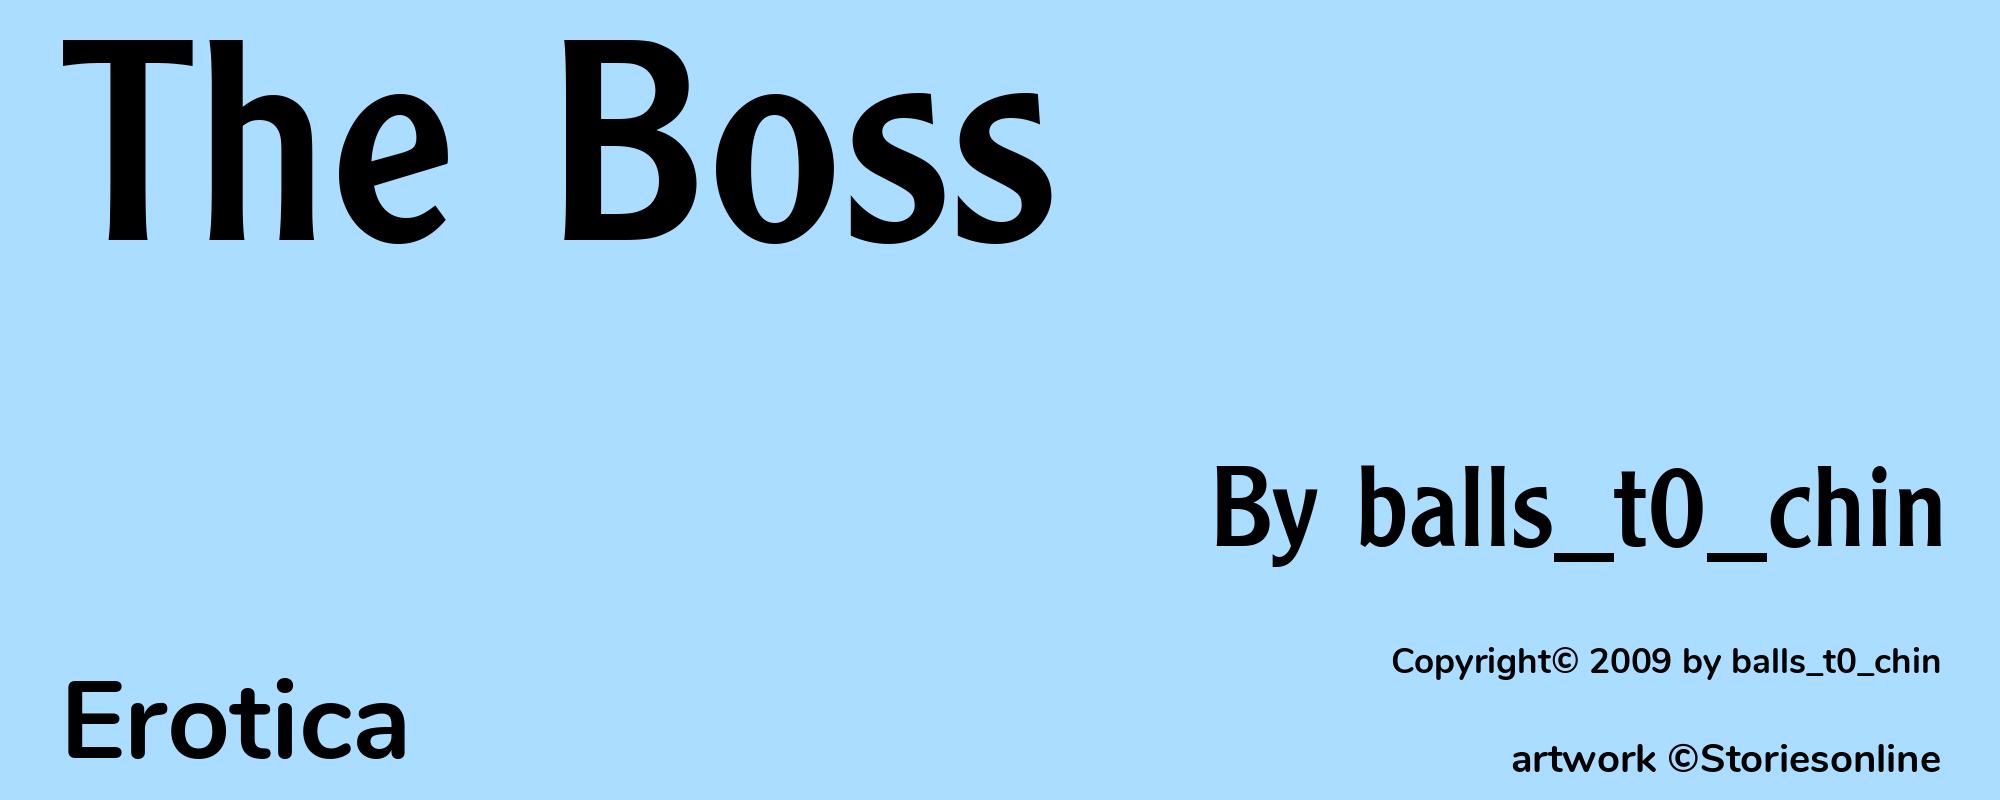 The Boss - Cover